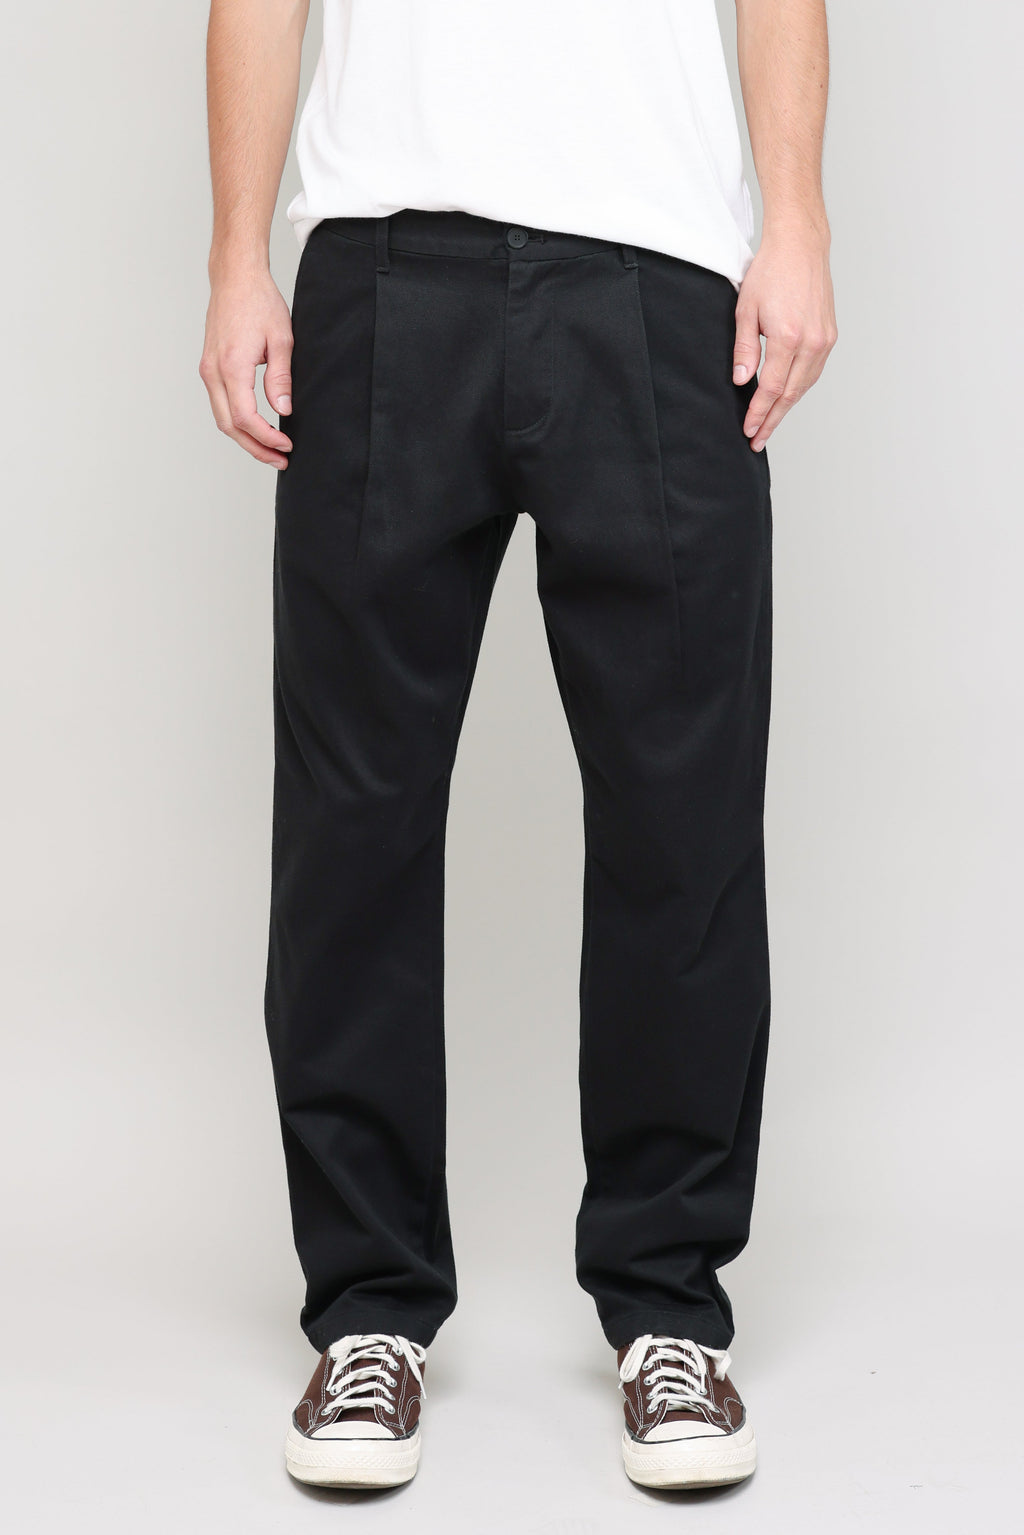 Pleated Chino Texture Cloth in Black 01